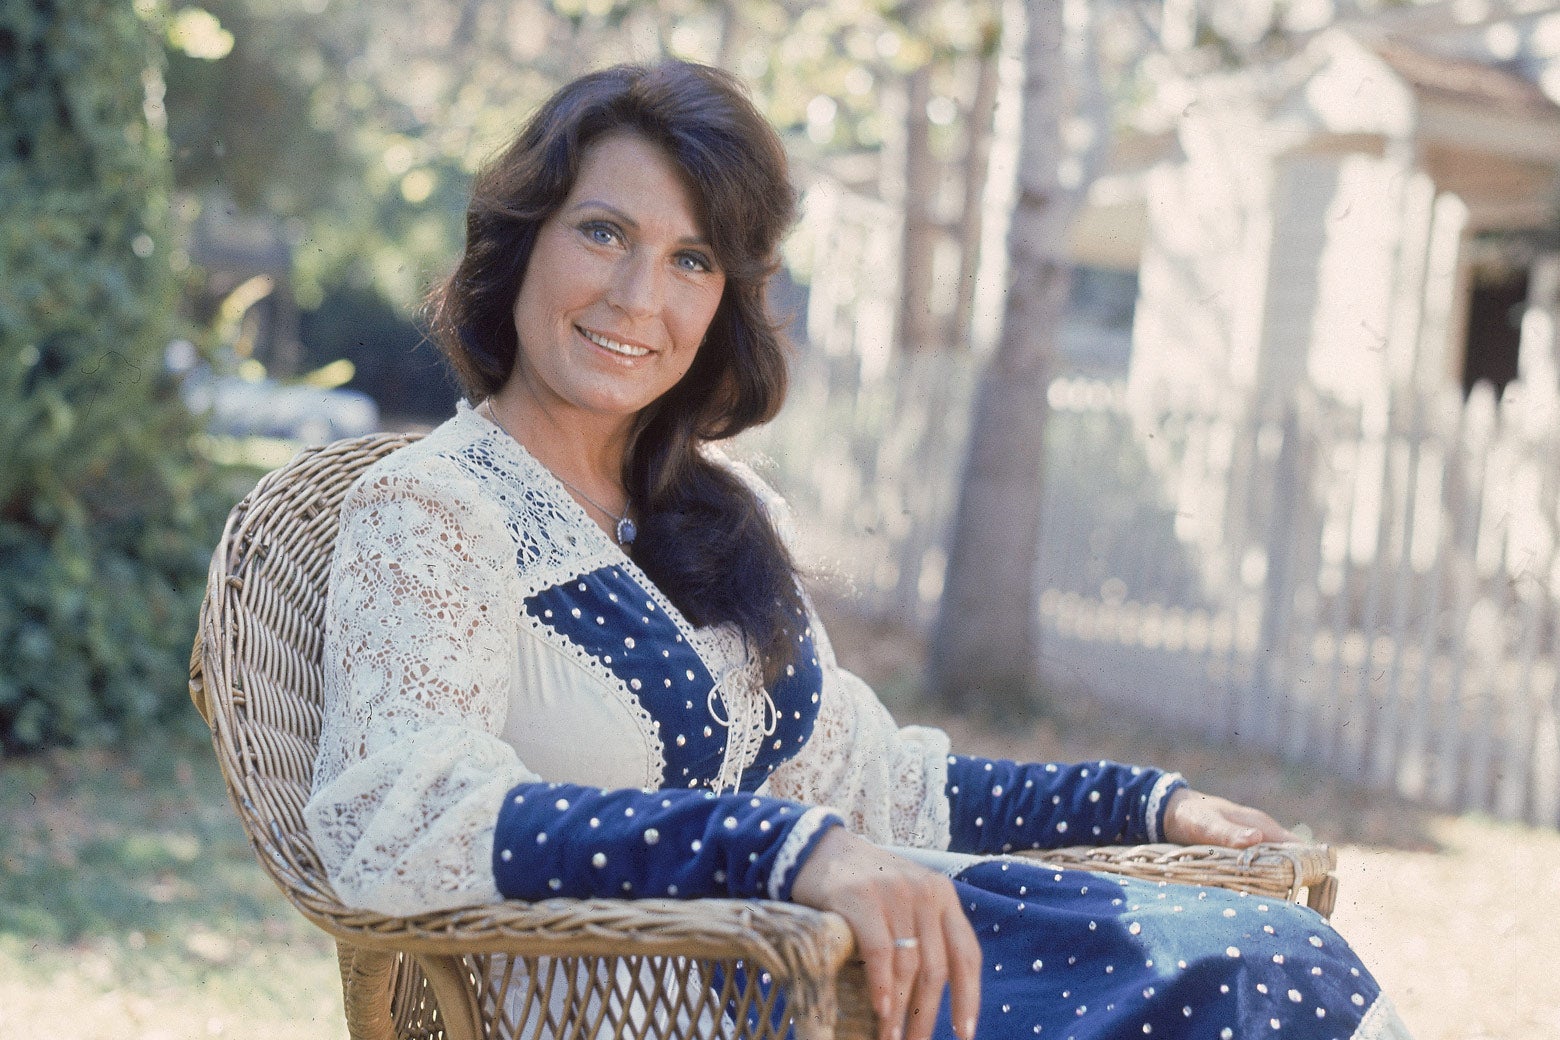 A portrait of shows the singer and guitarist sitting outside in a wicker chair, wearing a blue-and-white lacy dress, and long faintly curly brown hair, smiling at the camera